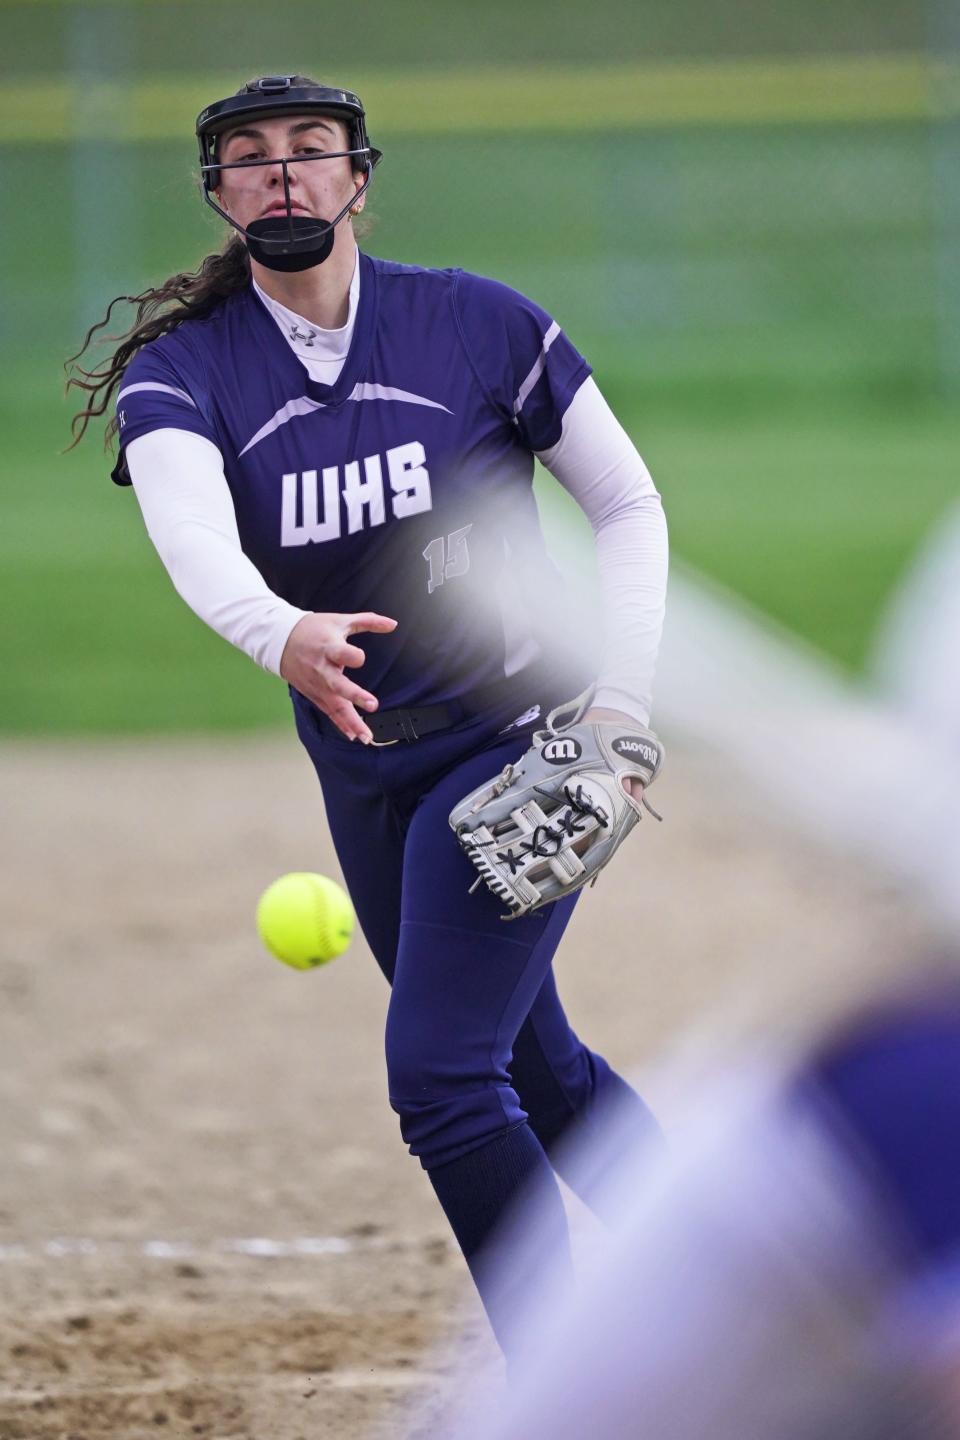 Westerly's Sophia Valentini fires a pitch to a Johnston batter during their game on Monday night.